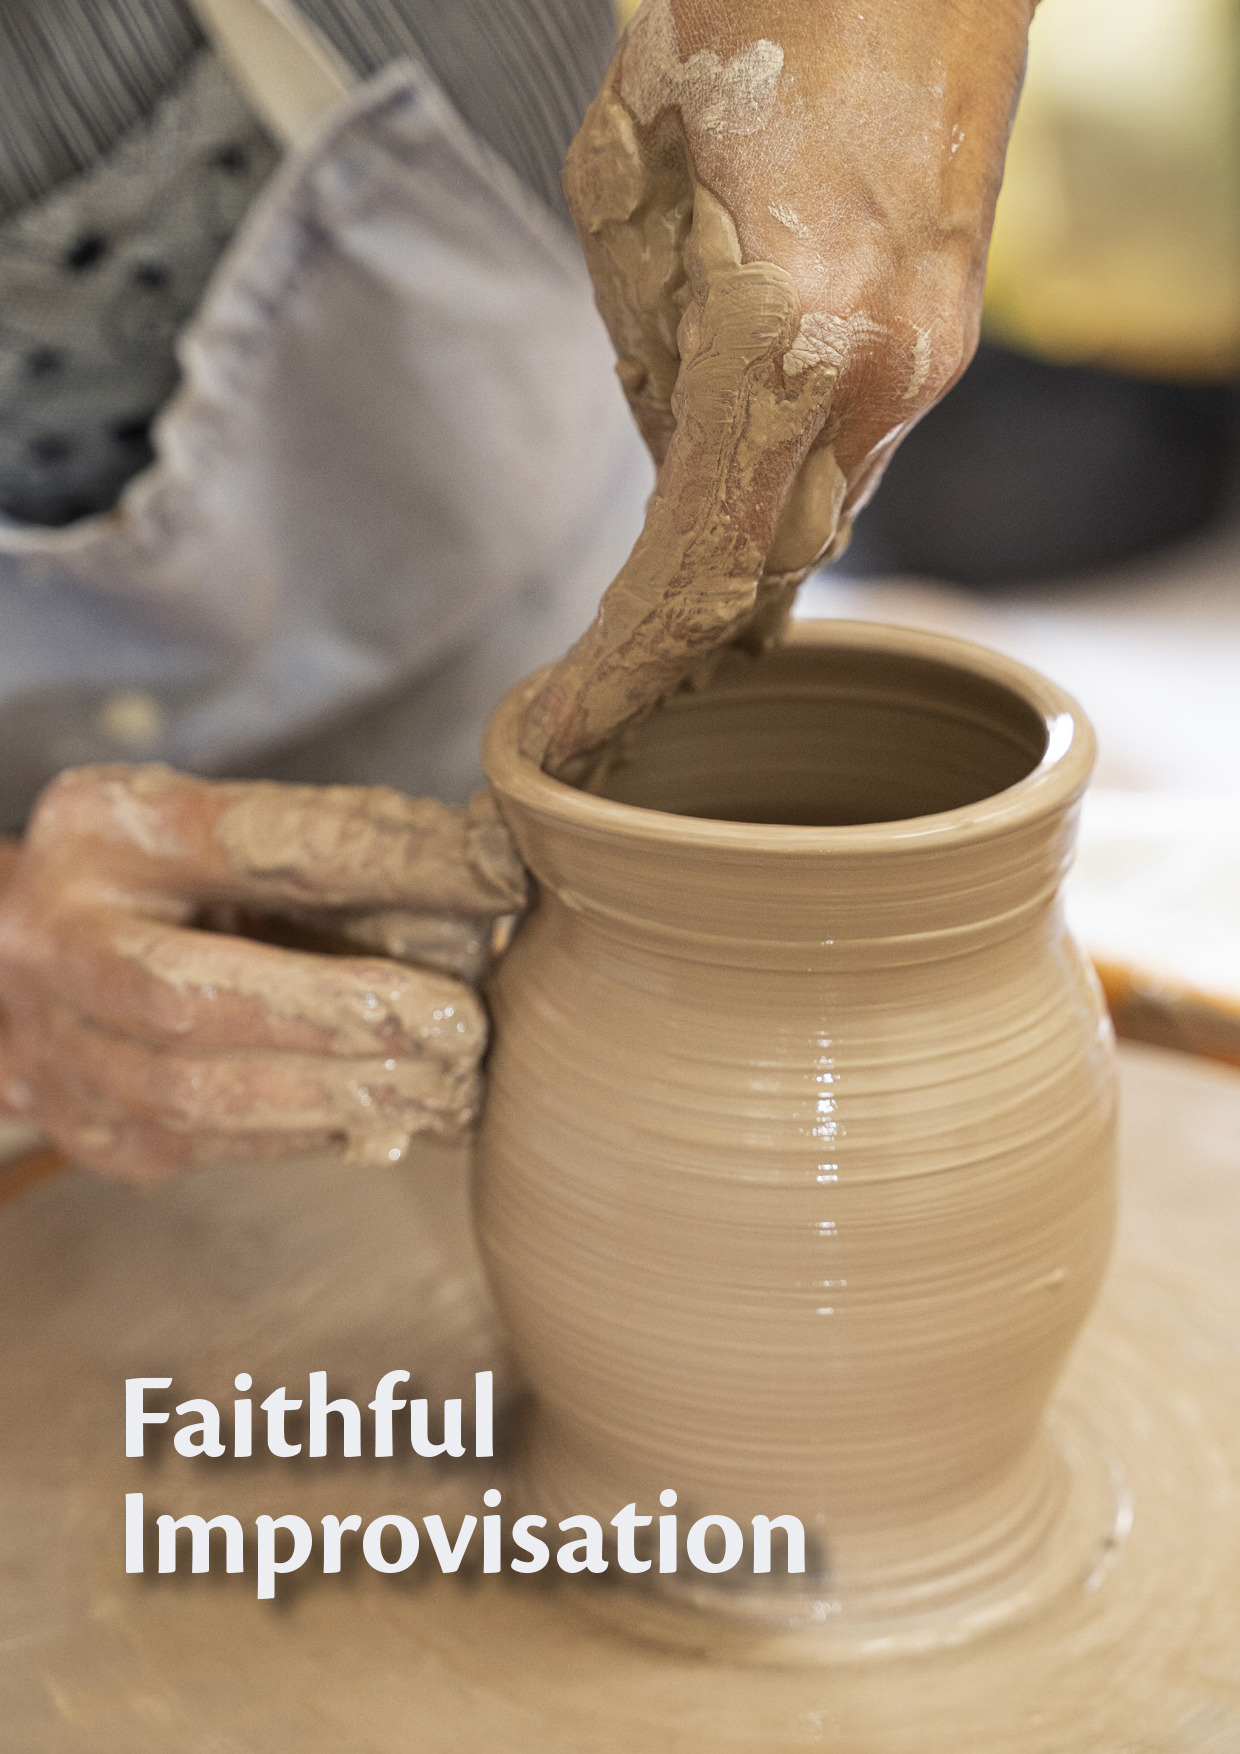 Potters hands creating a pot on a wheel with the faithful improvisation words